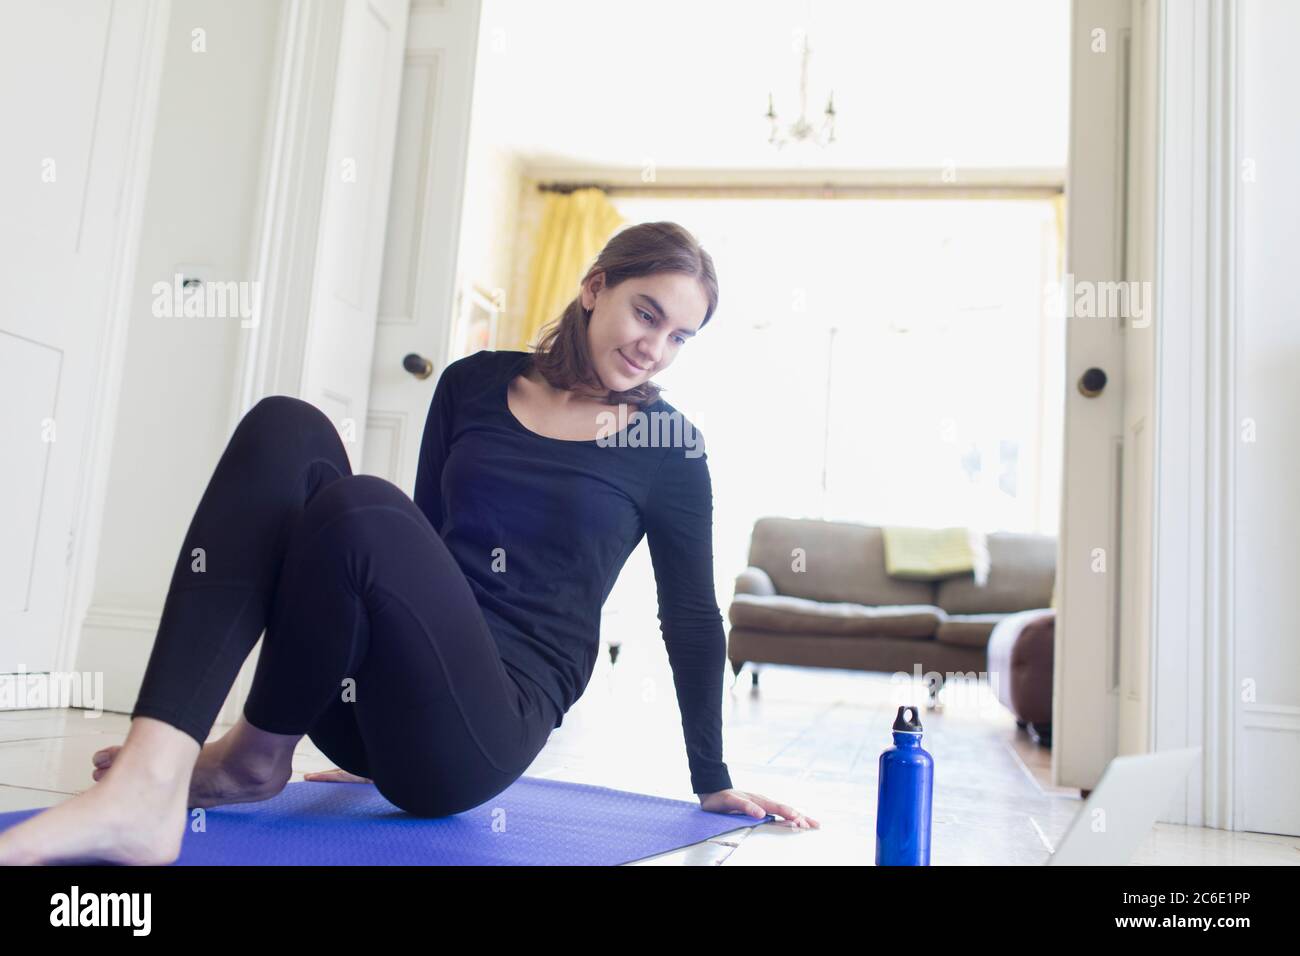 Teenage girl exercising online at home Stock Photo